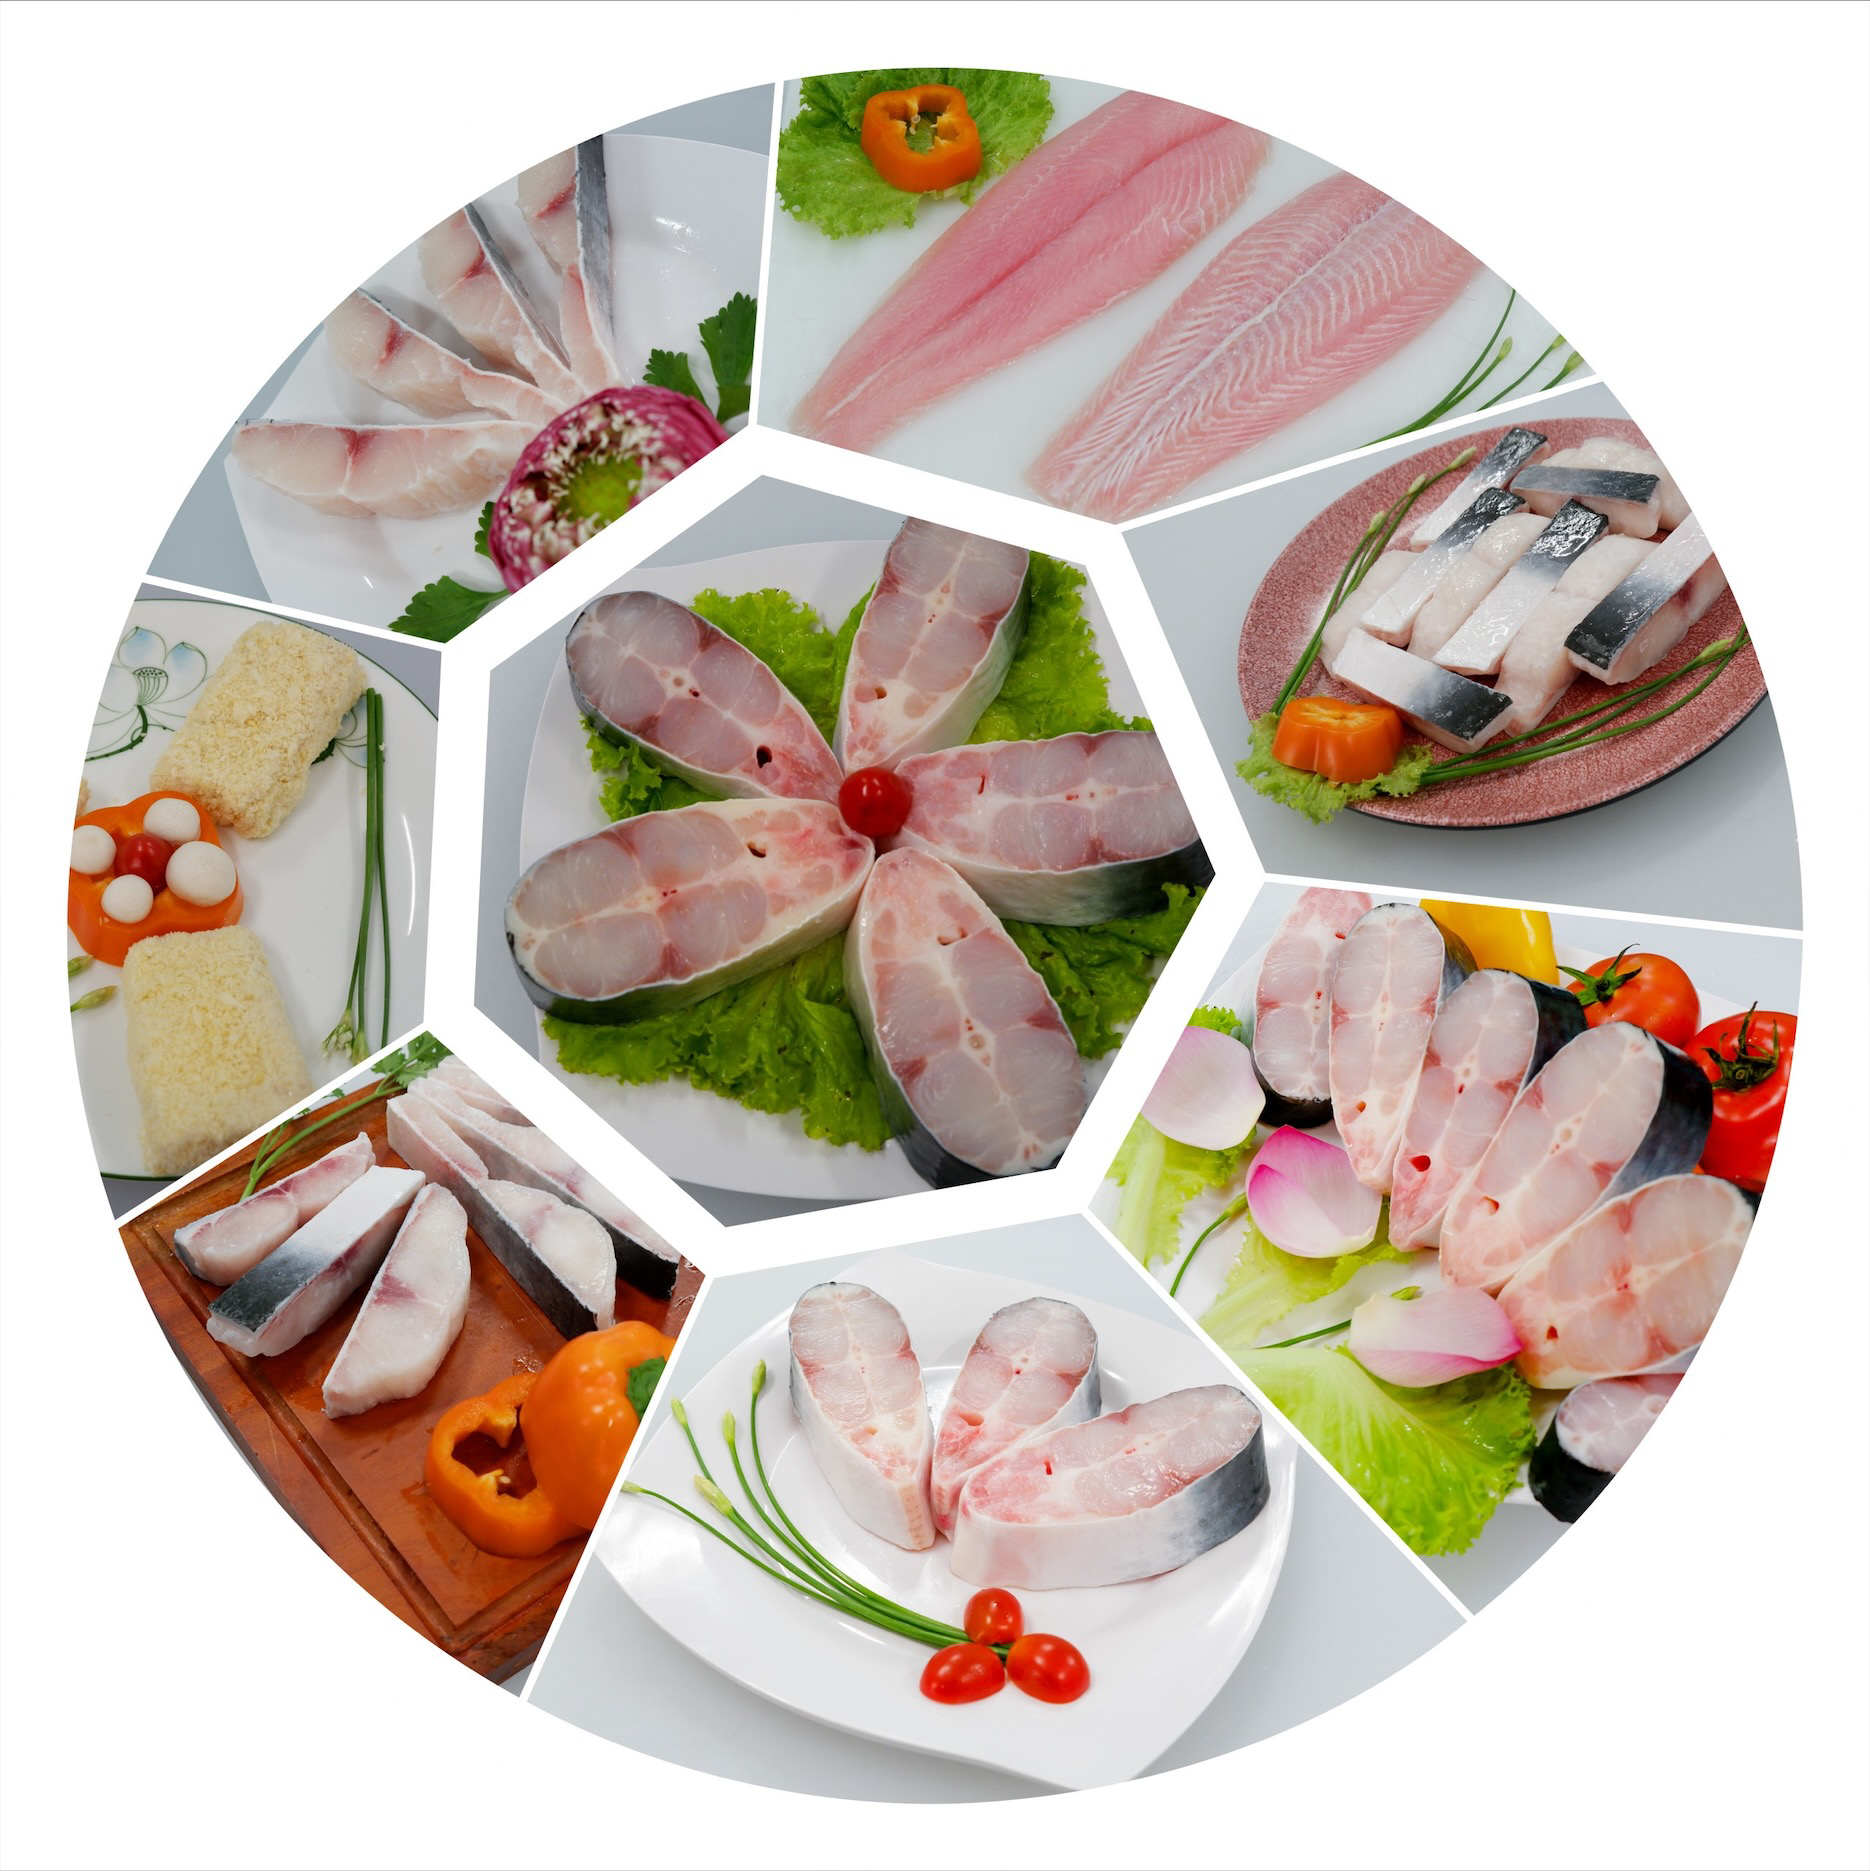 <span  class="uc_style_uc_tiles_grid_image_elementor_uc_items_attribute_title" style="color:#ffffff;">Pangasius Products</span>